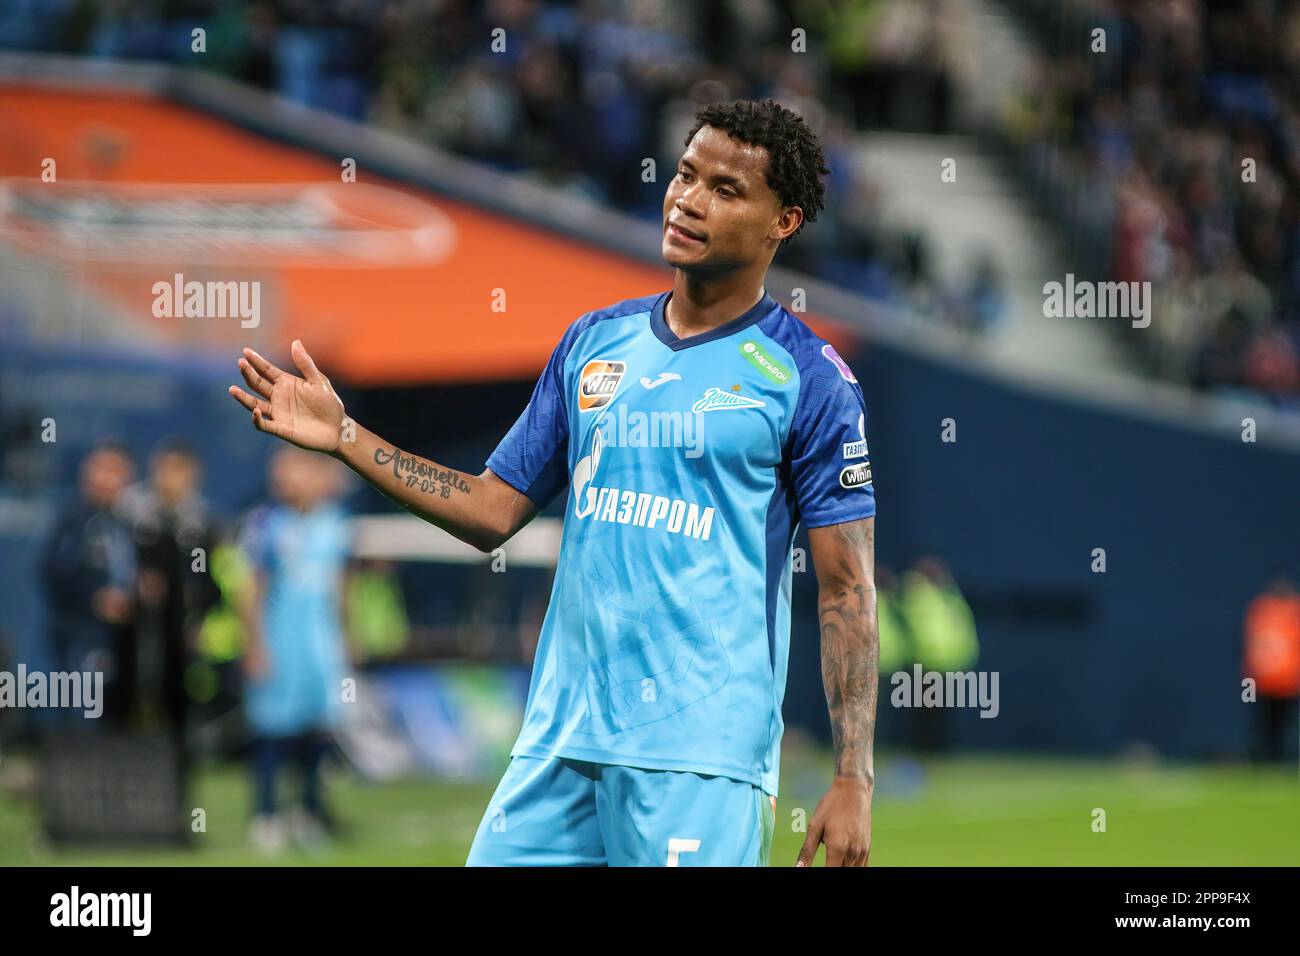 Saint Petersburg, Russia. 22nd Apr, 2023. Wilmar Enrique Barrios Teran, commonly known as Wilmar Barrios (No.5) of Zenit seen during the Russian Premier League football match between Zenit Saint Petersburg and Dynamo Moscow at Gazprom Arena. Zenit 3:1 Dynamo. Credit: SOPA Images Limited/Alamy Live News Stock Photo